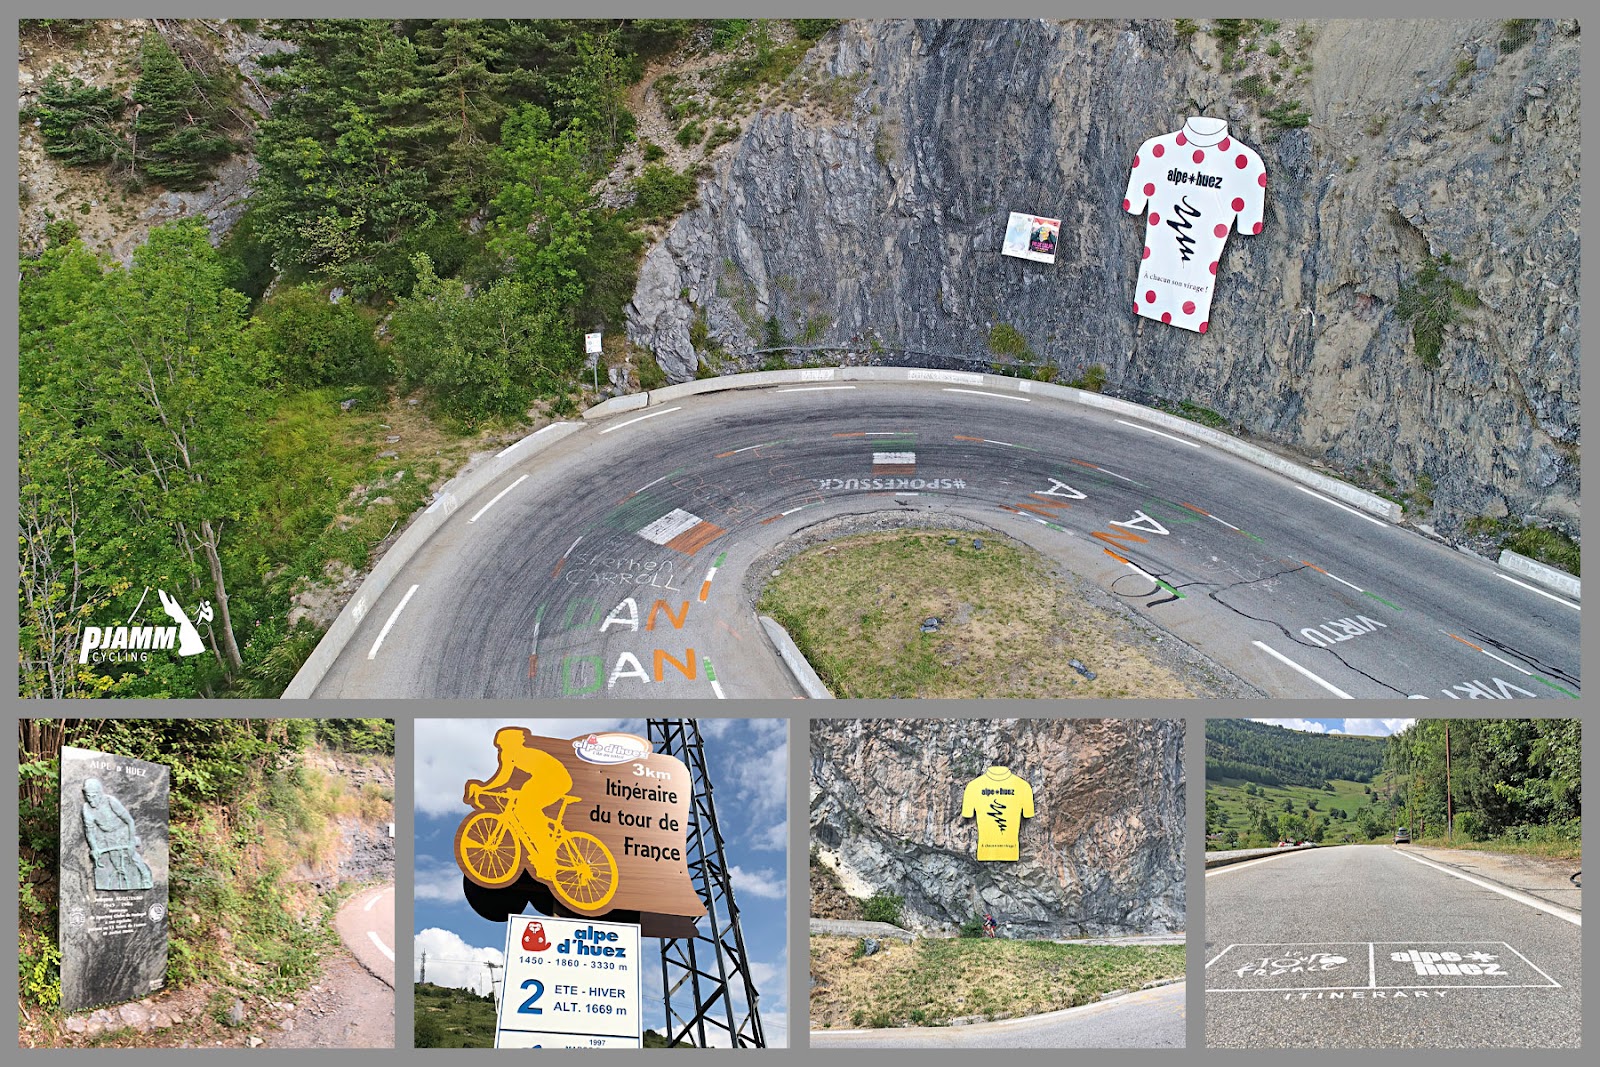 aerial drone view shows Tour de France polka dot jersey sign on rock face along switchbacks, multiple Tour de France signs along climb route